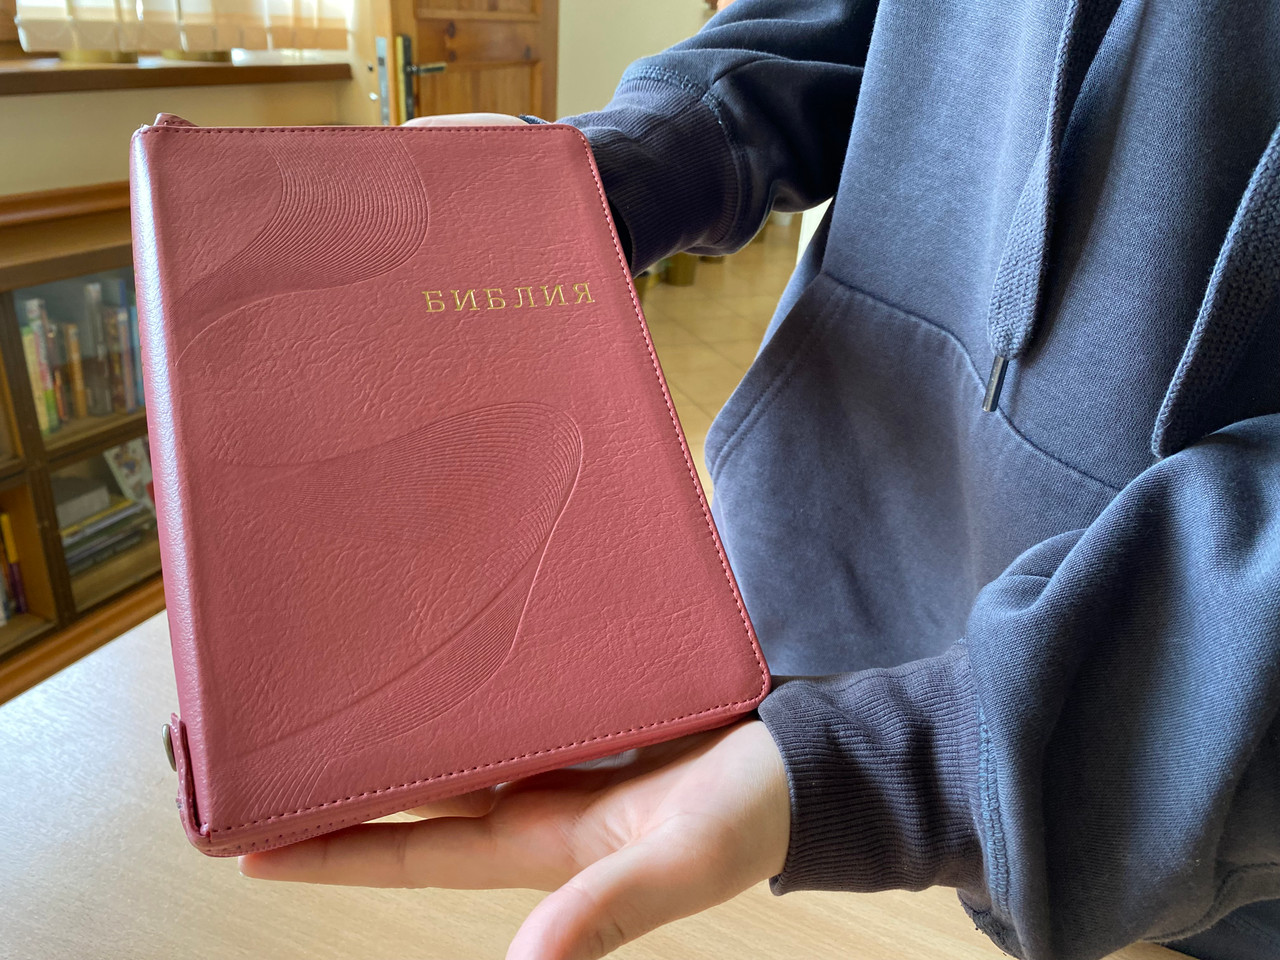 https://cdn10.bigcommerce.com/s-62bdpkt7pb/products/52959/images/268977/Pink_Russian_Bible_with_family_pages_gift_wedding_children_events_Pink_Leather_bound_with_zippe_indexes_buttonr_and_golden_edges_Mid_Size_19__97465.1678103875.1280.1280.JPG?c=2&_gl=1*qcubhb*_ga*MjAyOTE0ODY1OS4xNTkyNDY2ODc5*_ga_WS2VZYPC6G*MTY3ODEzNzA5NS4yOTQ5LjEuMTY3ODEzOTQzMS4yOS4wLjA.